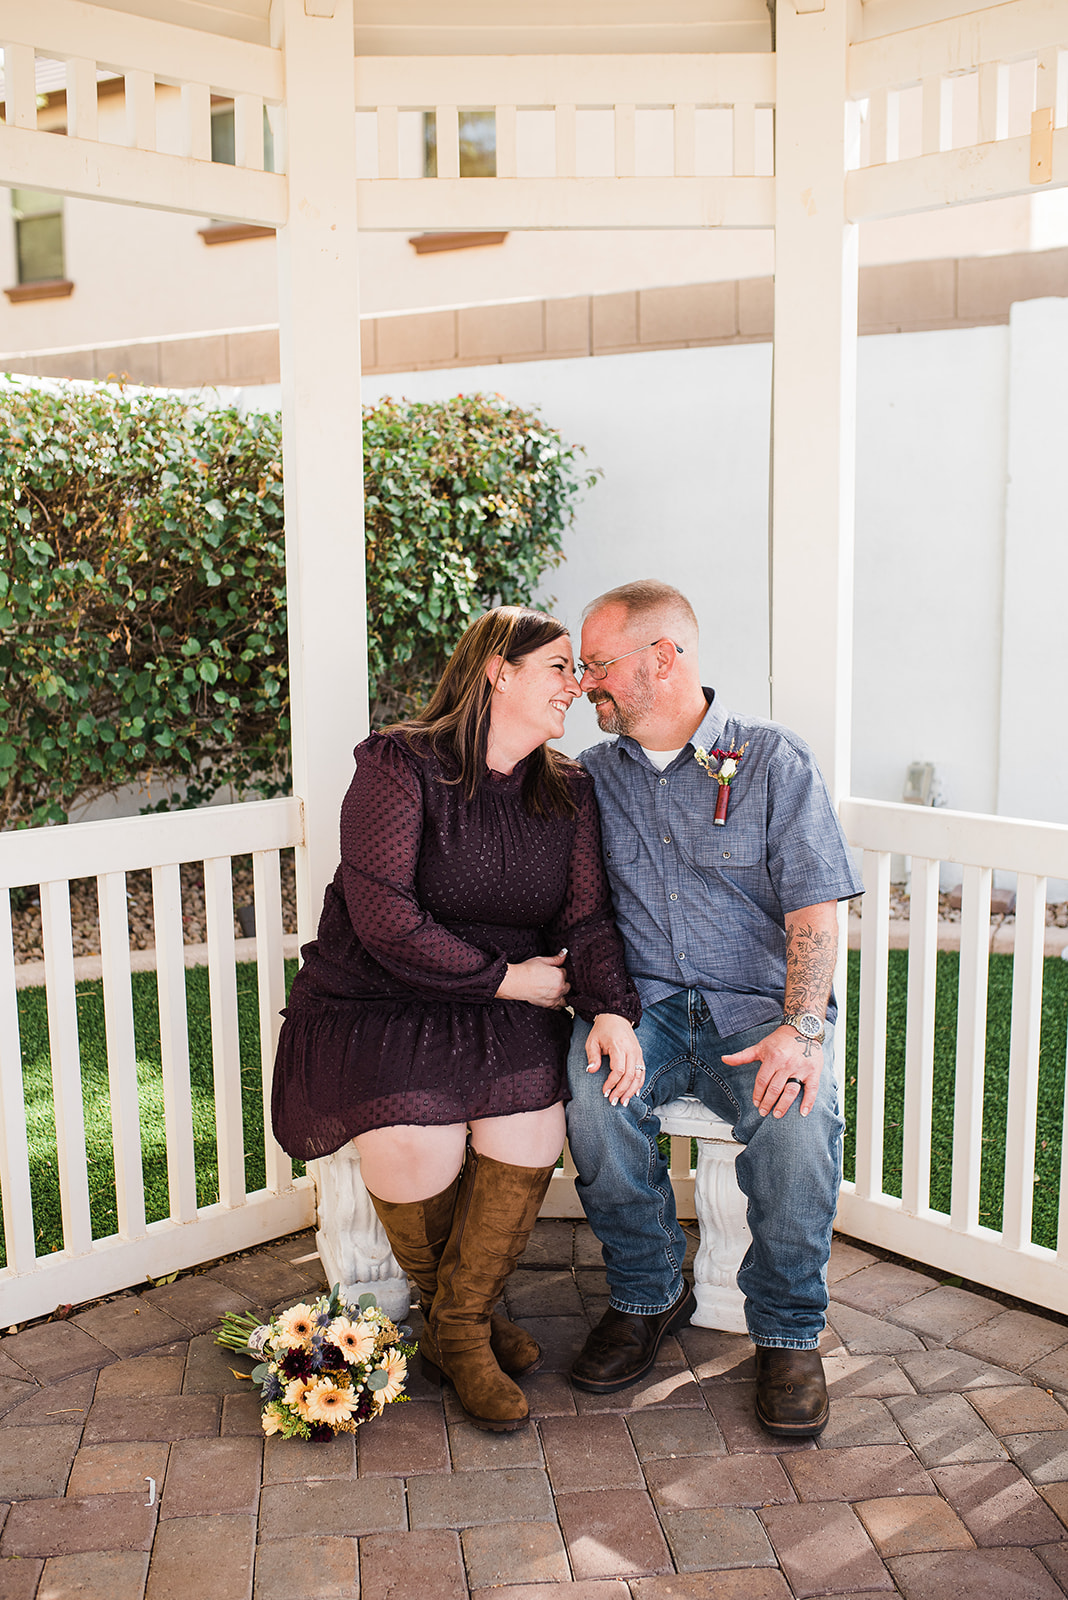 Newlyweds sit on a bench under a gazebo on a stone patio in denim and a purple dress